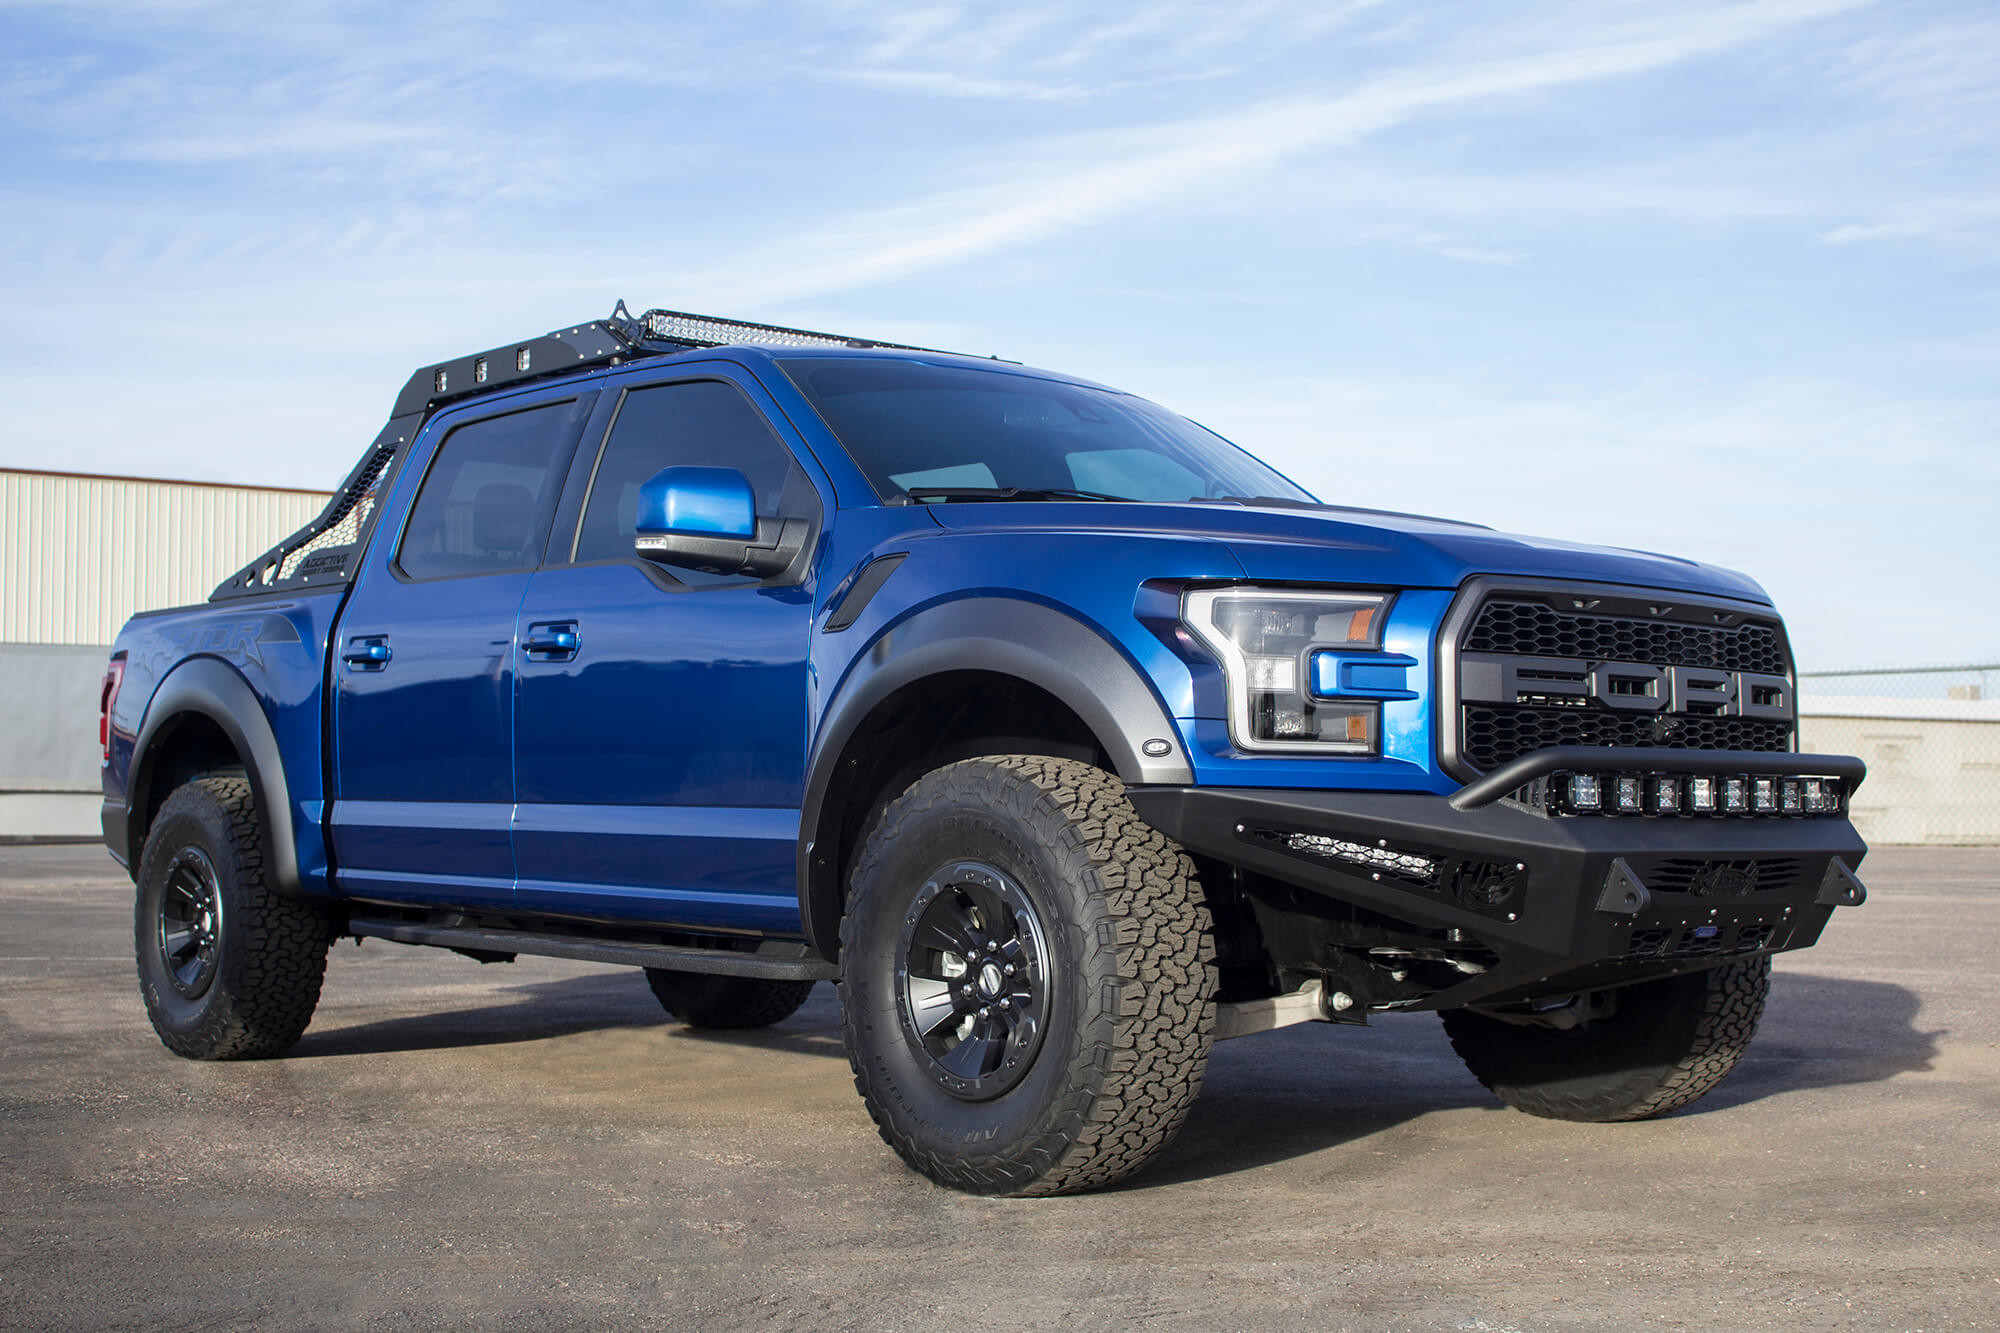 2000x1333 ... Extraordinary Ford Raptor About Lighting Blue Ford Raptor ...